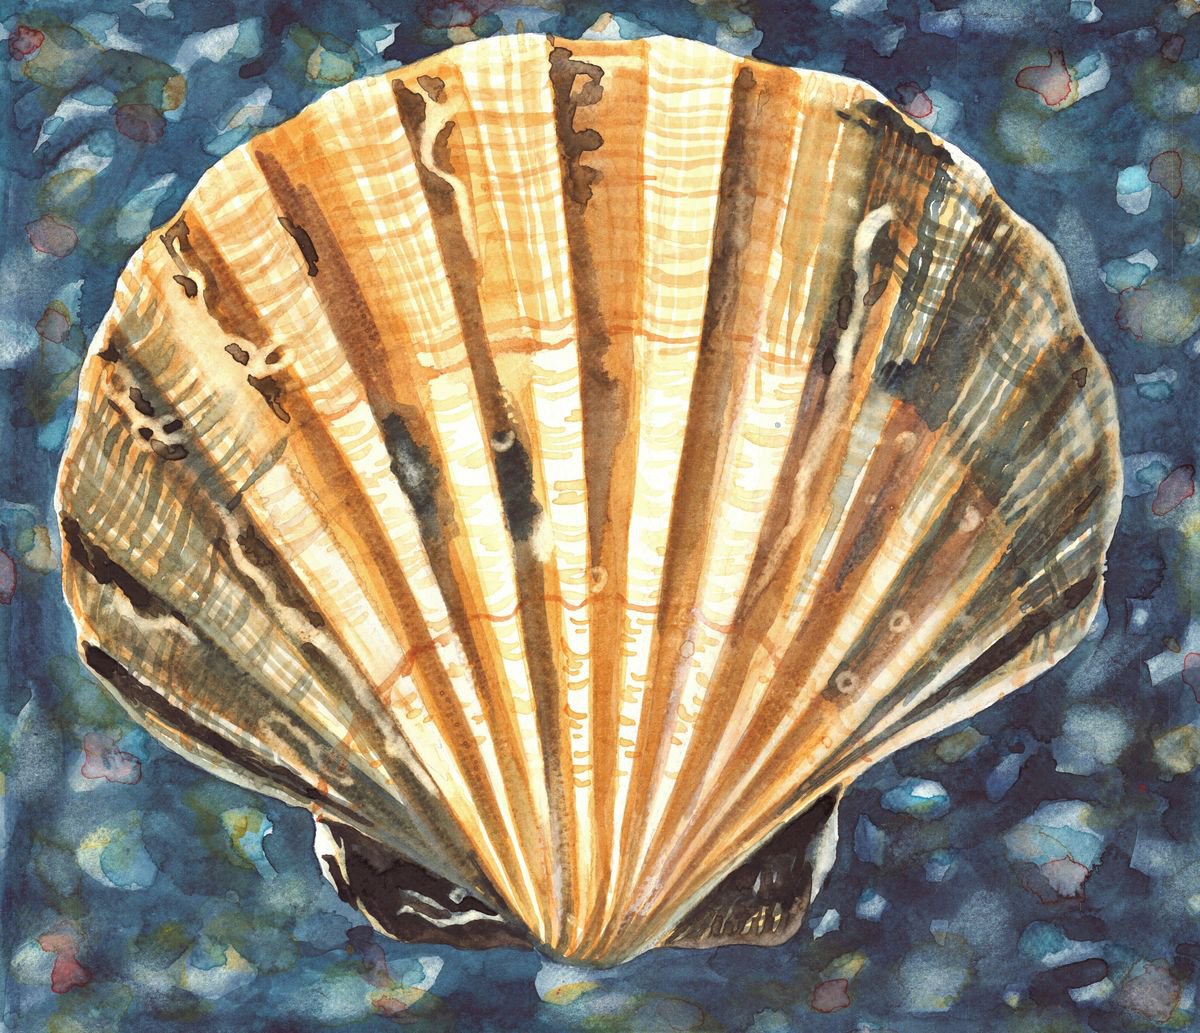 SHELL II by Nives Palmic